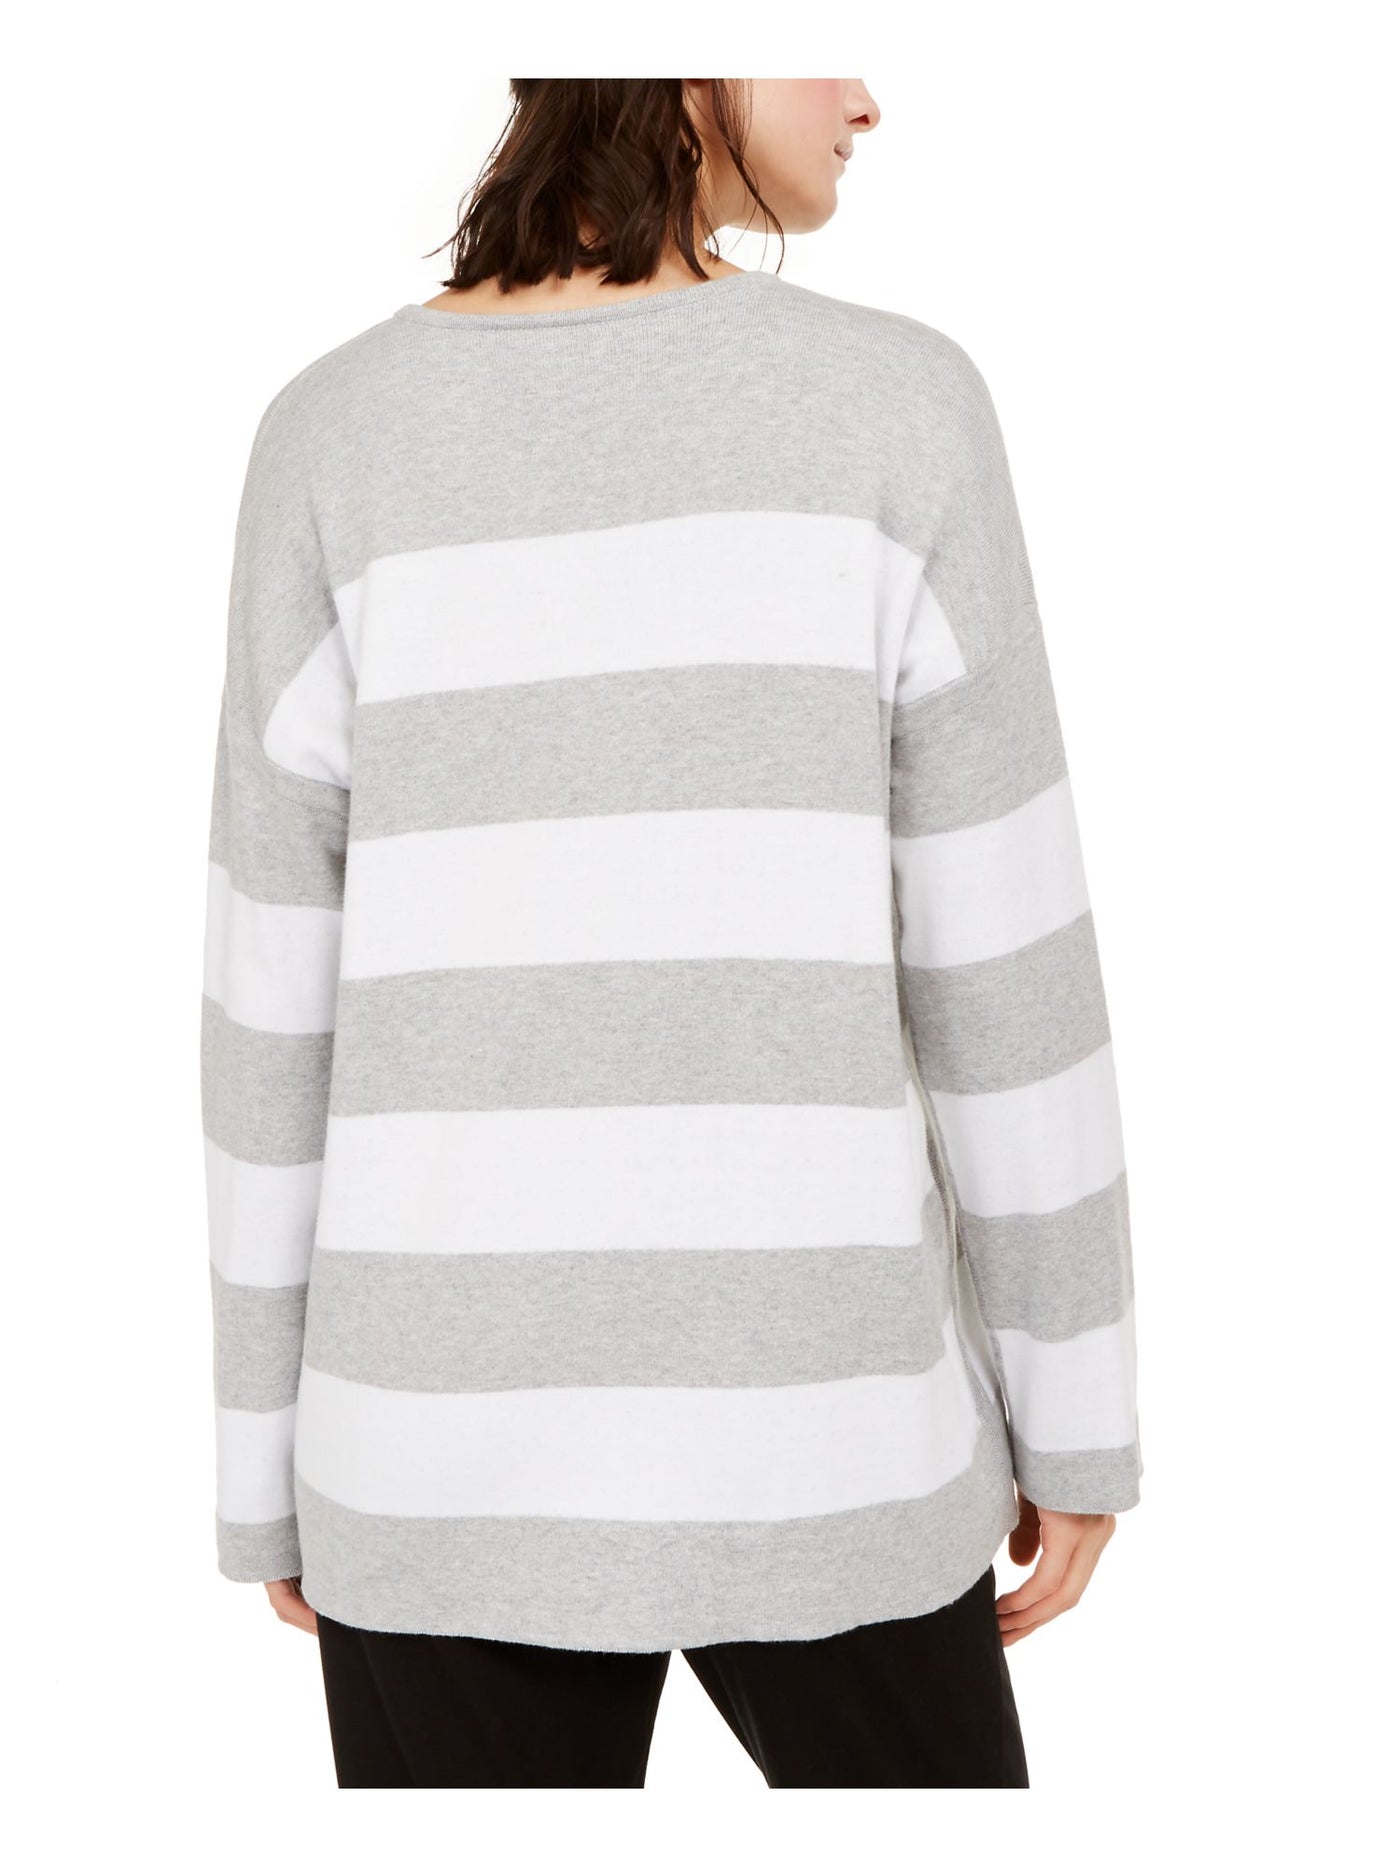 EILEEN FISHER Womens Gray Striped Long Sleeve Sweater Petites Size: PP